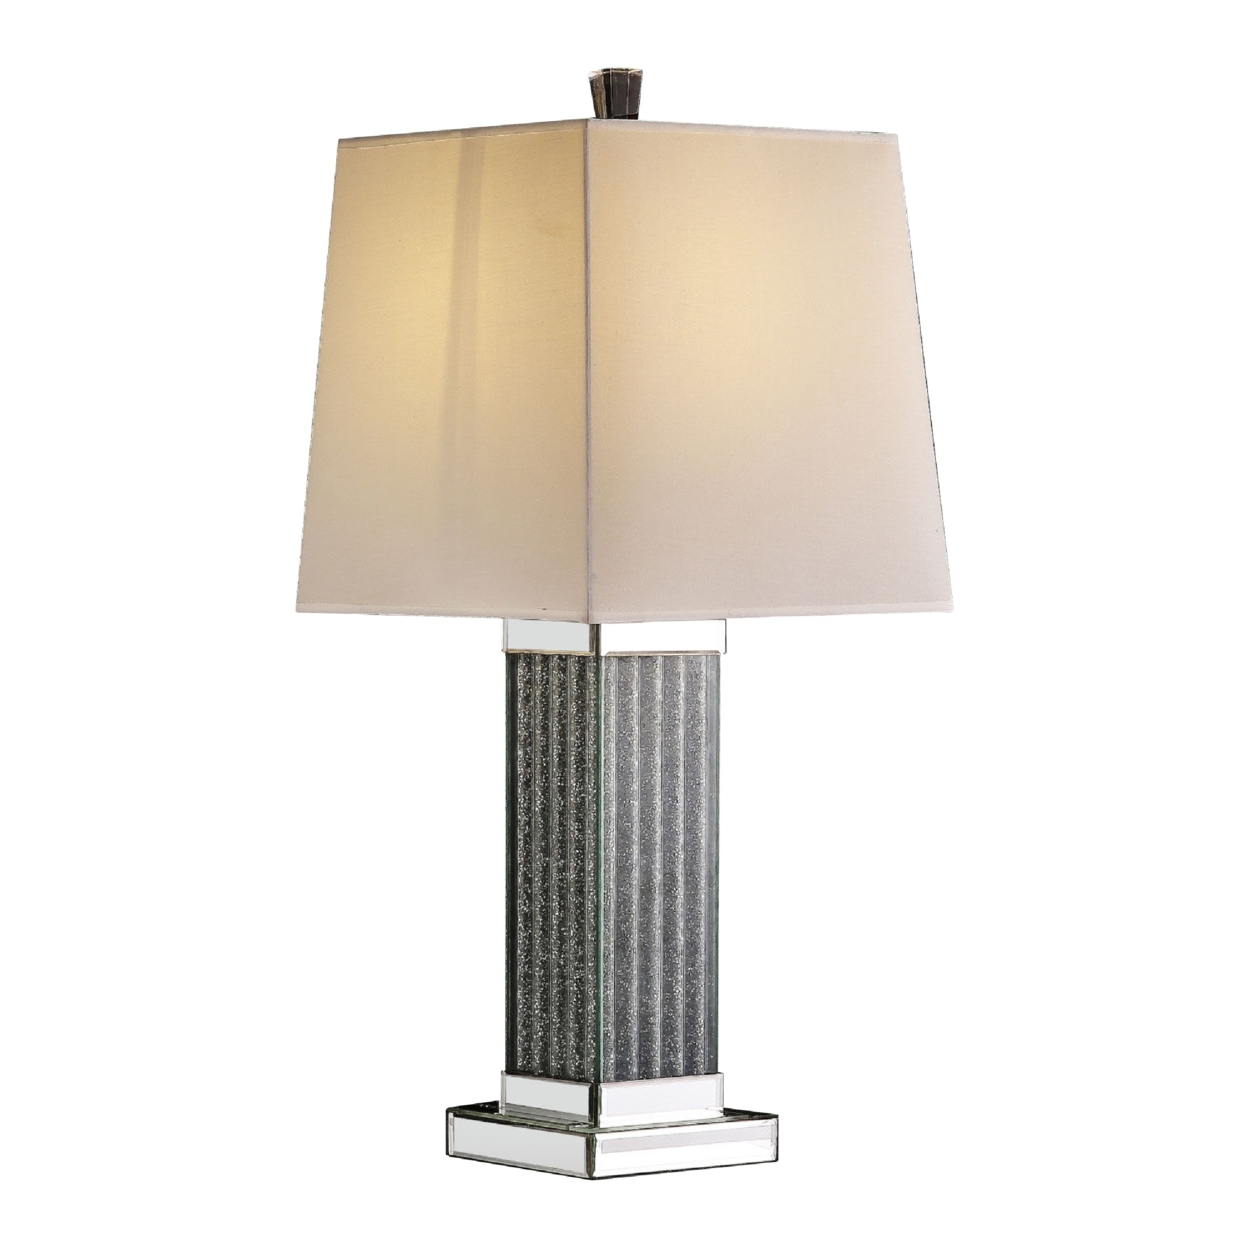 Table Lamp With Cuboid Shape And Faux Diamond Inlay, Silver- Saltoro Sherpi